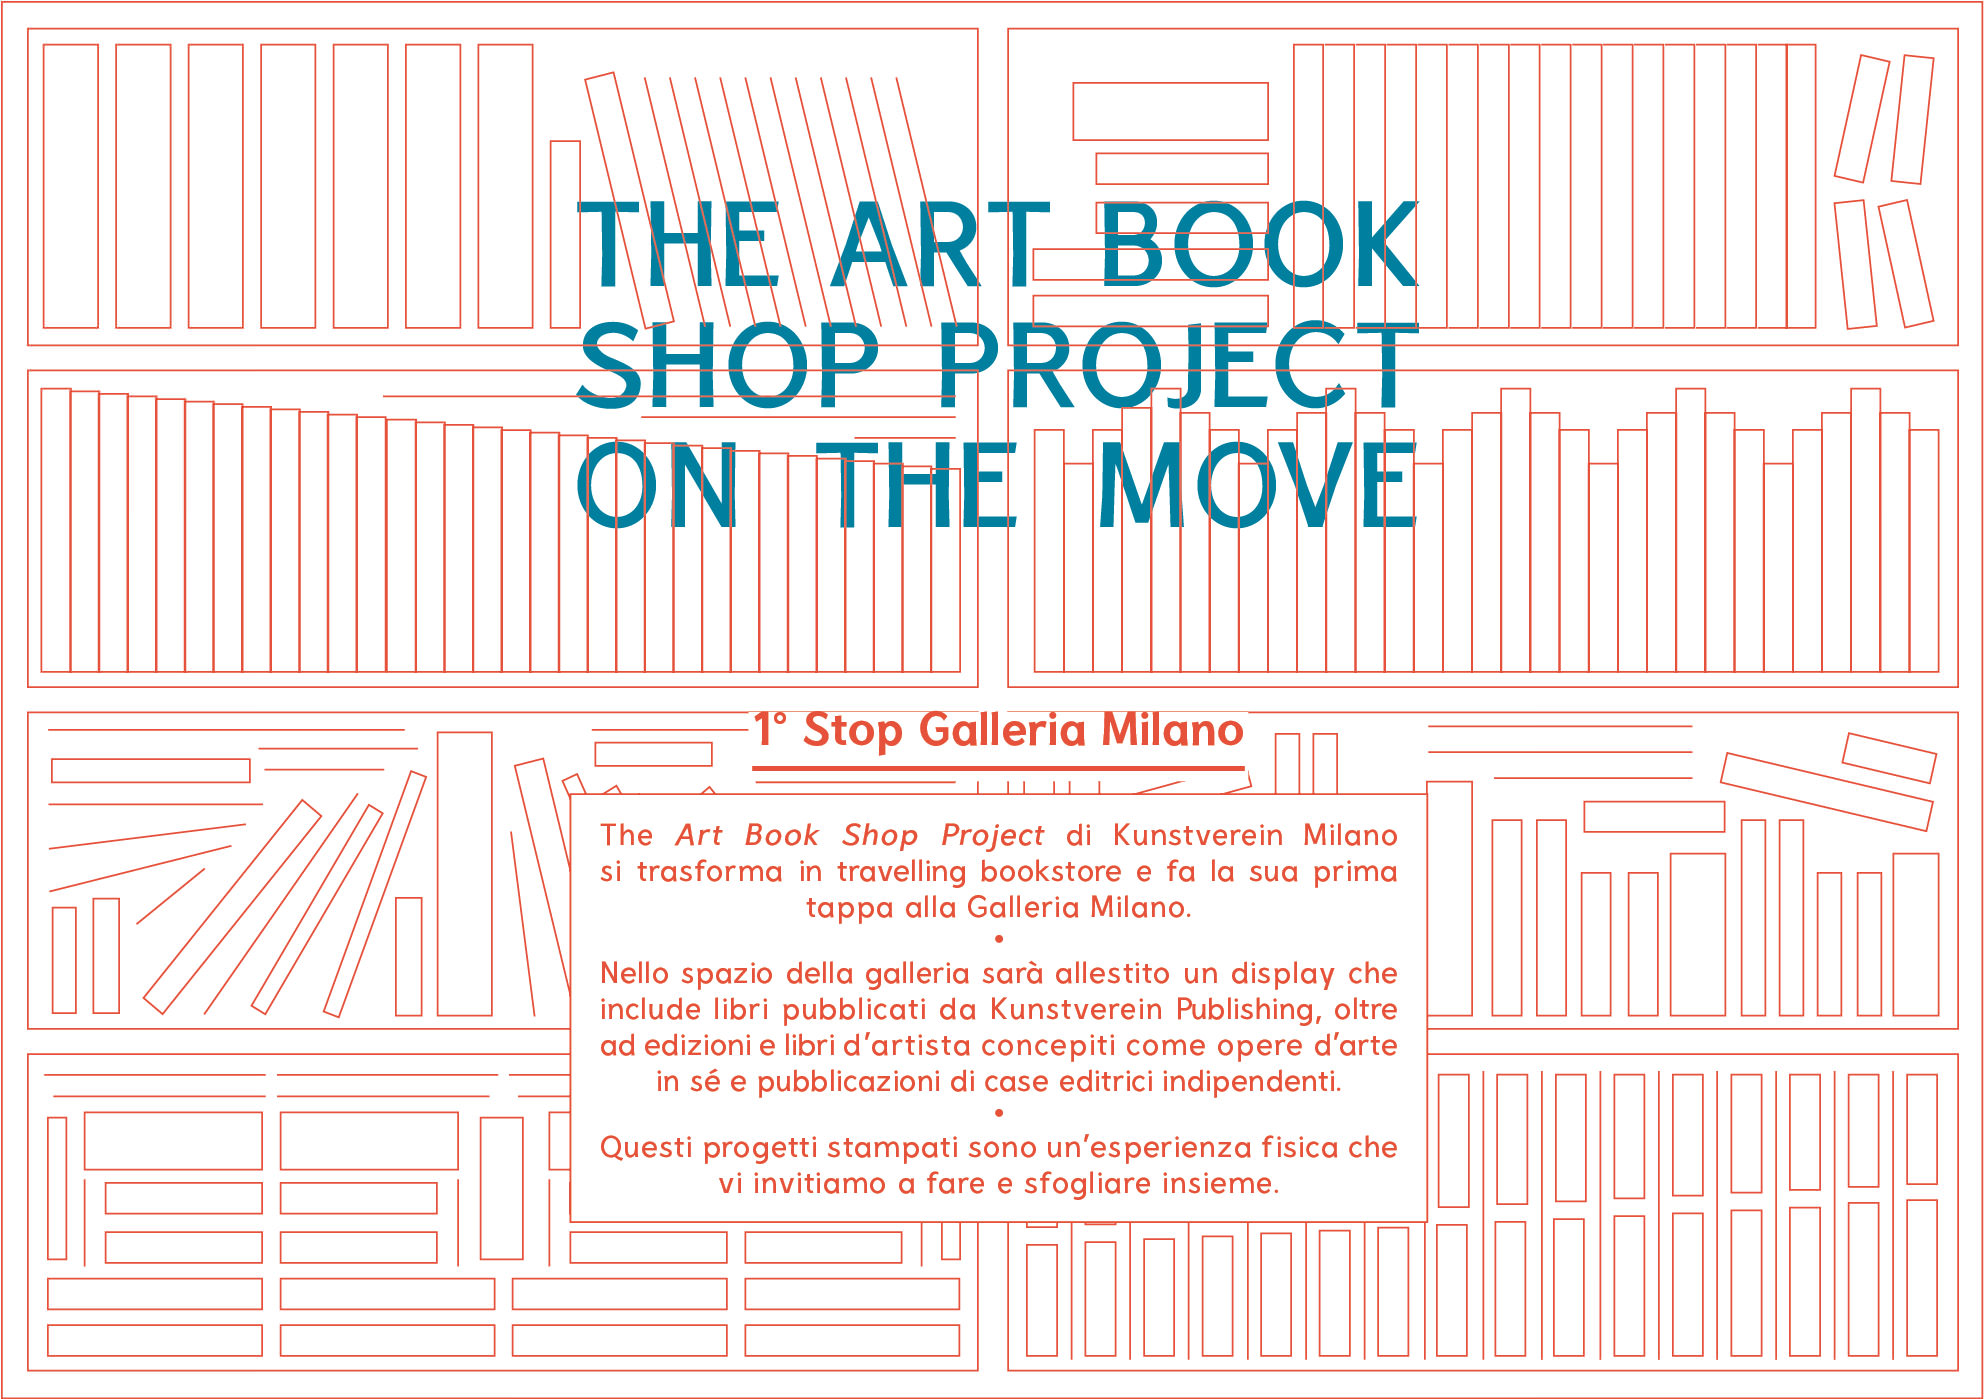 The Art Book Shop Project on the Move